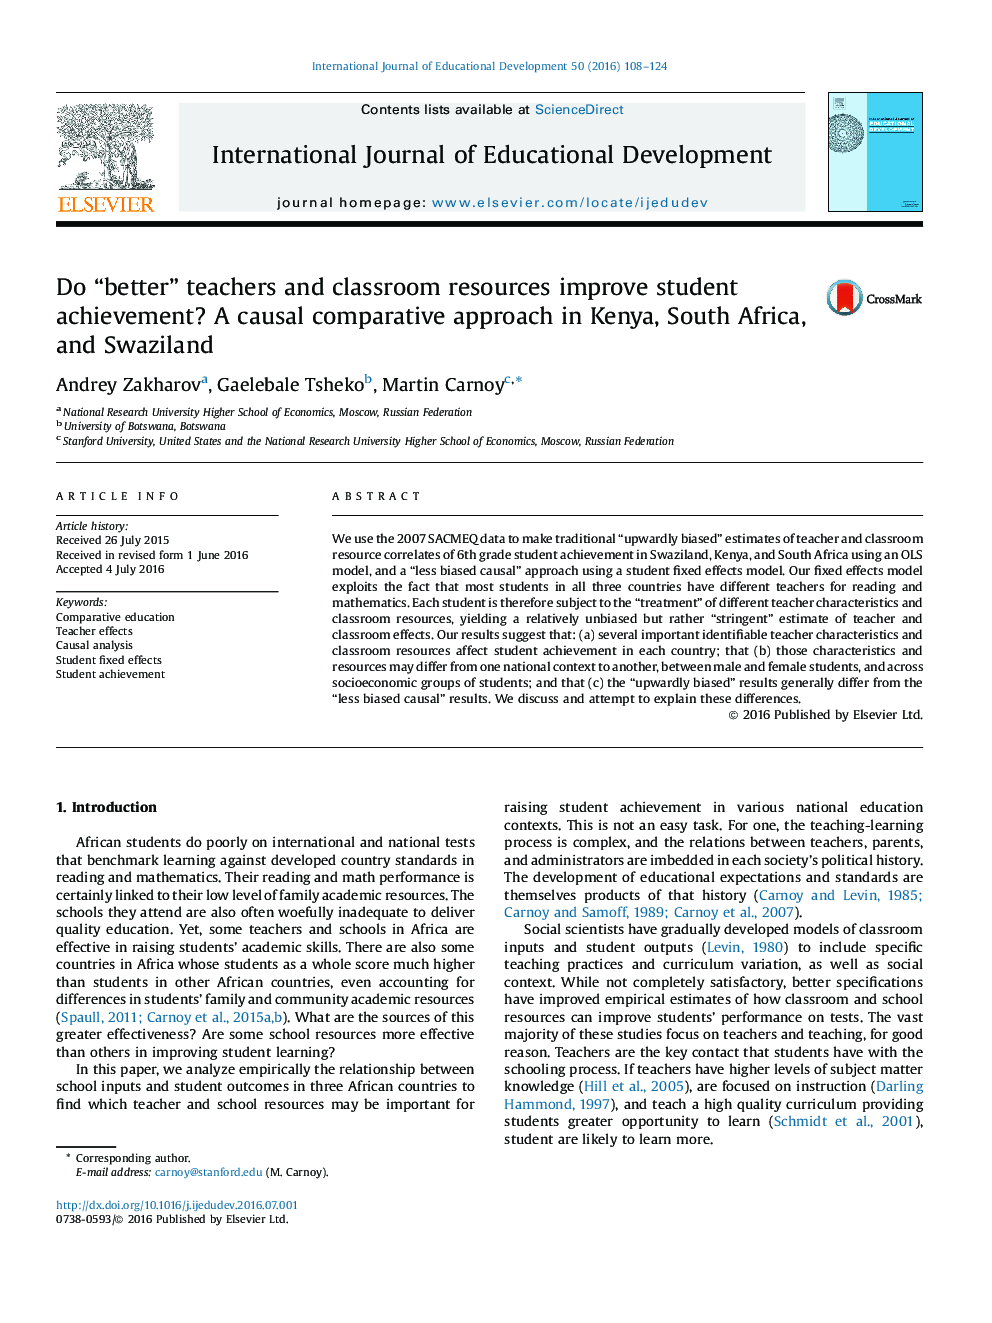 Do “better” teachers and classroom resources improve student achievement? A causal comparative approach in Kenya, South Africa, and Swaziland